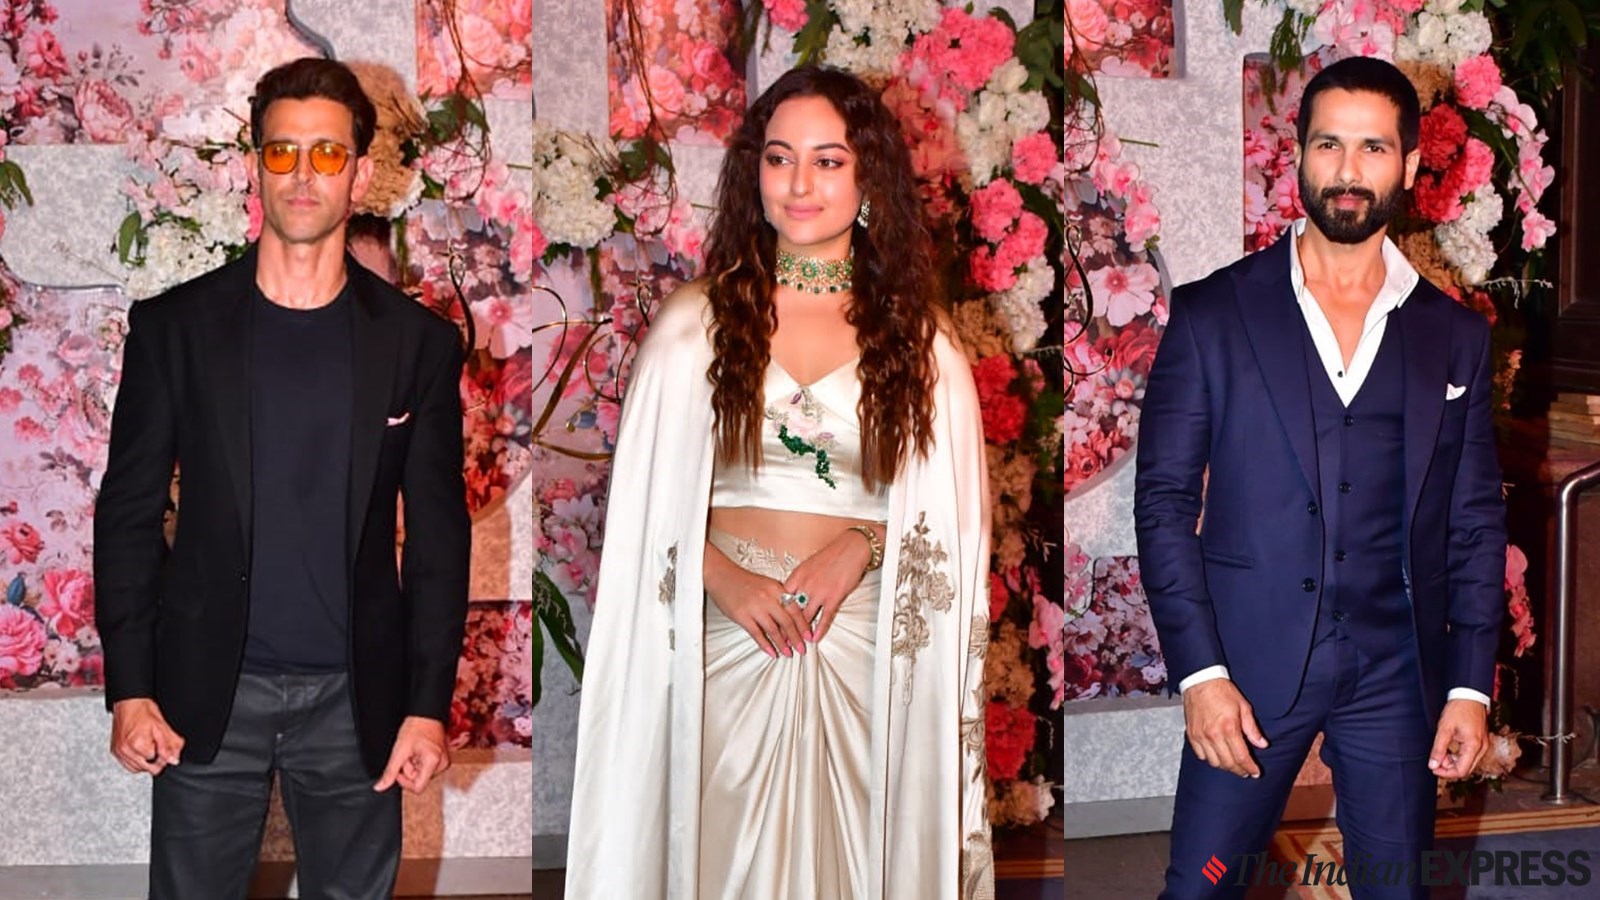 Bollywood Stars Sonakshi Xxx - Bollywood stars Hrithik Roshan, Sonakshi Sinha, Shahid Kapoor and others,  attend reception party in glam avatars | Fashion News - The Indian Express